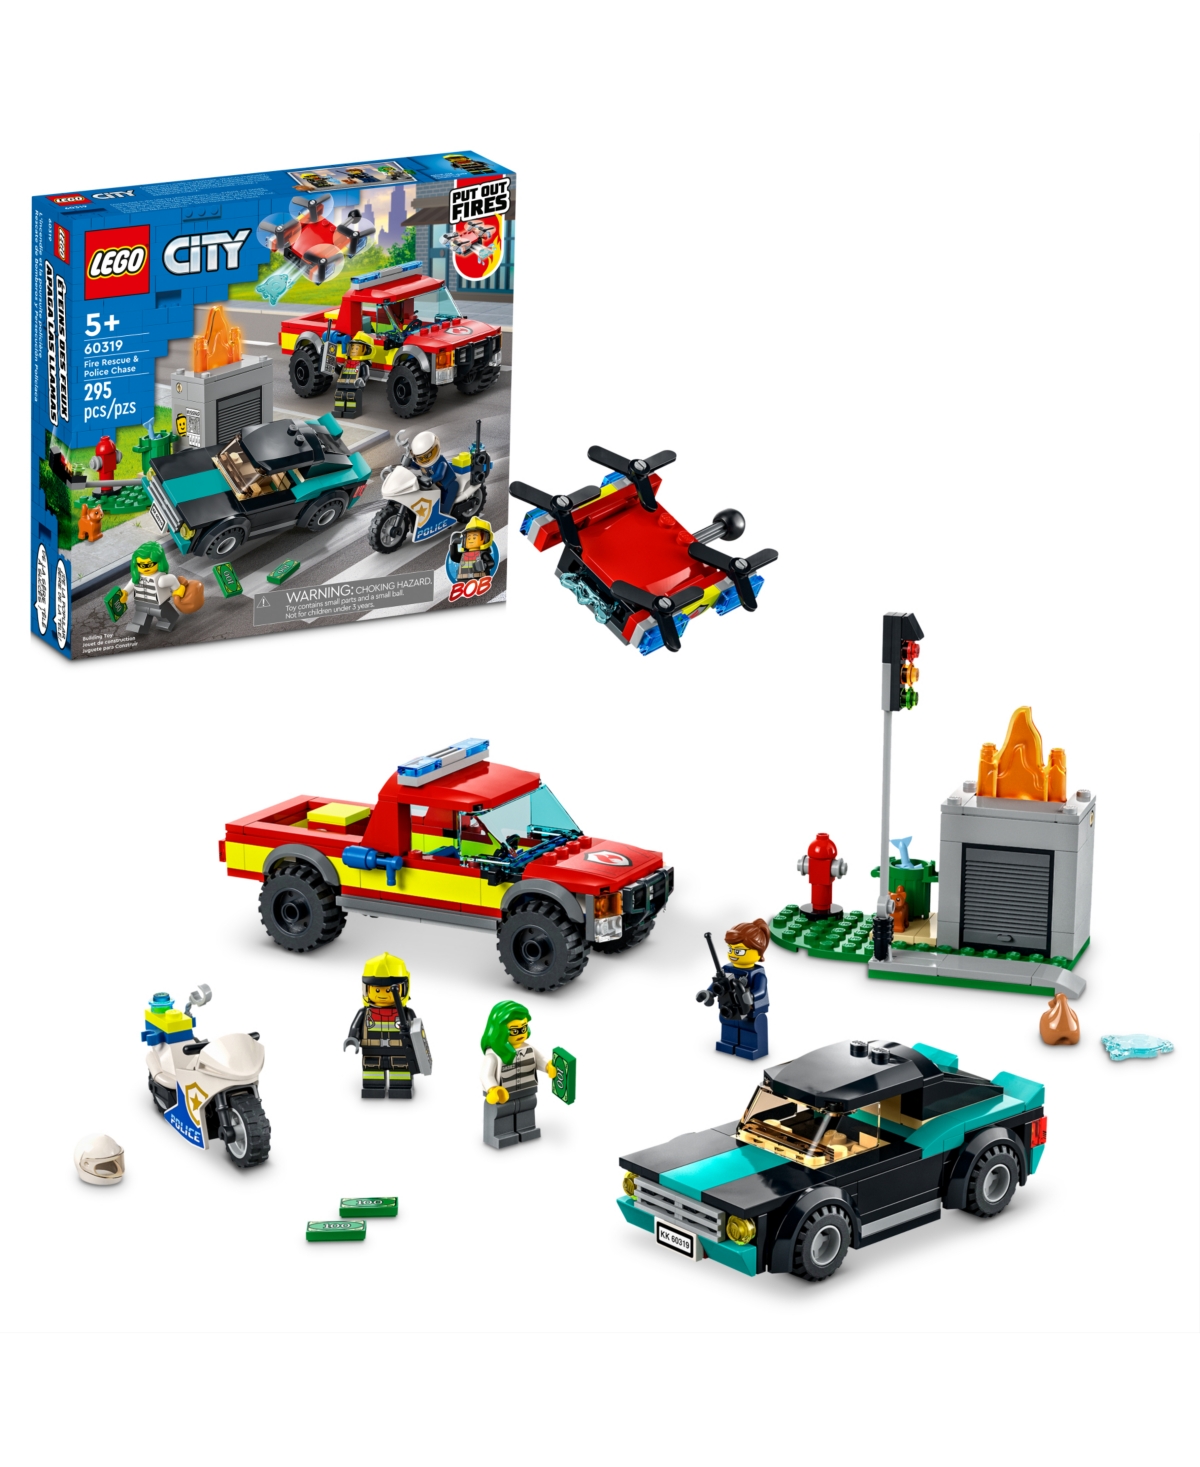 Lego Kids' City Fire Fire Rescue & Police Chase 60319 Building Set, 295 Pieces In No Color